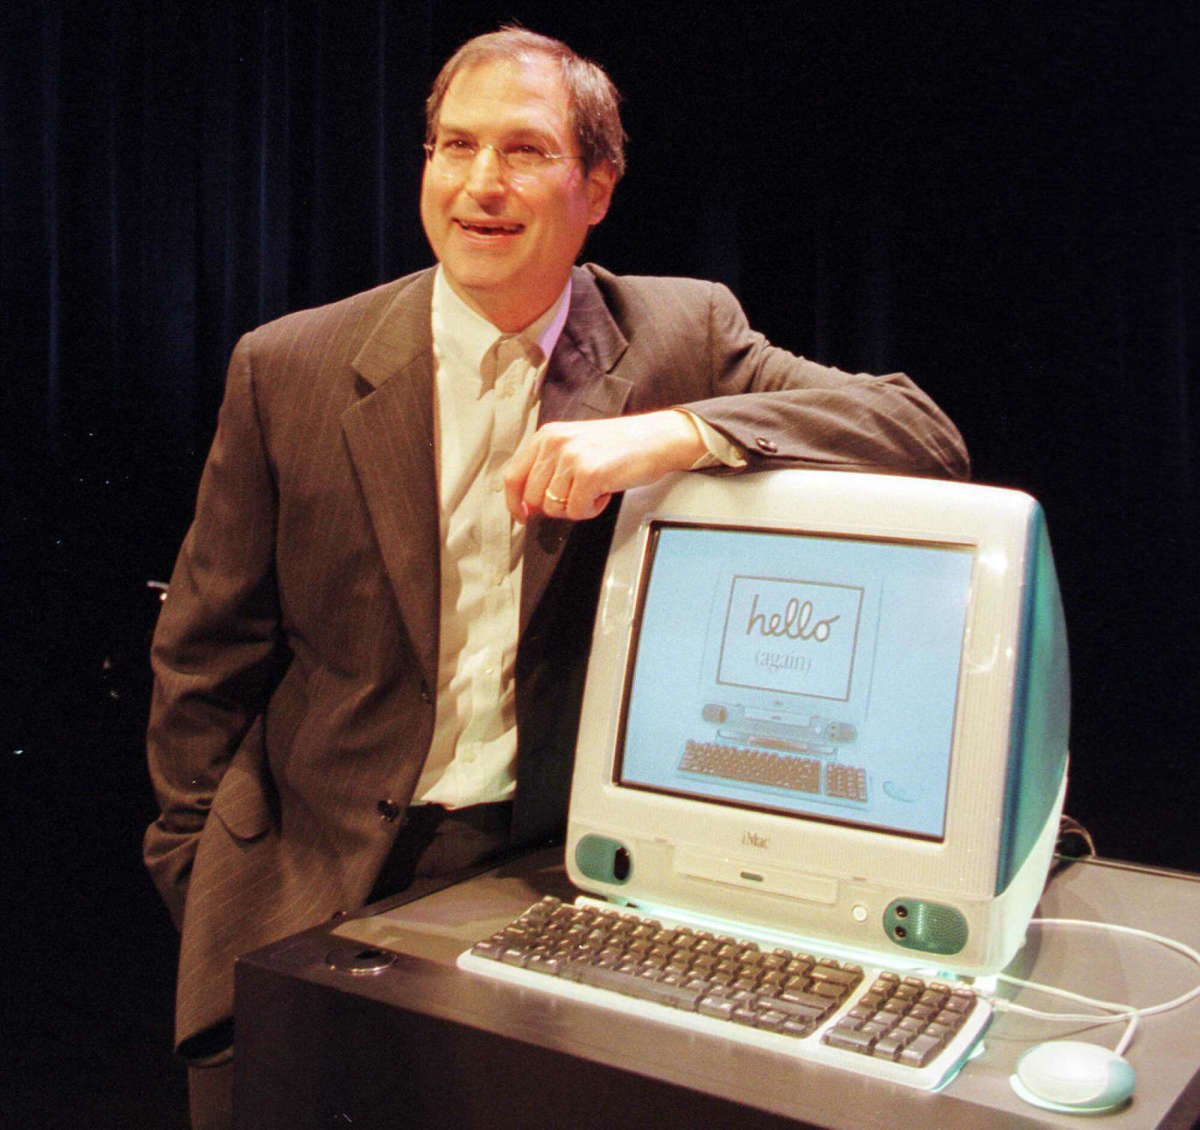 Apple In The 1990s: Why It Nearly Went Bankrupt - Apple Maven